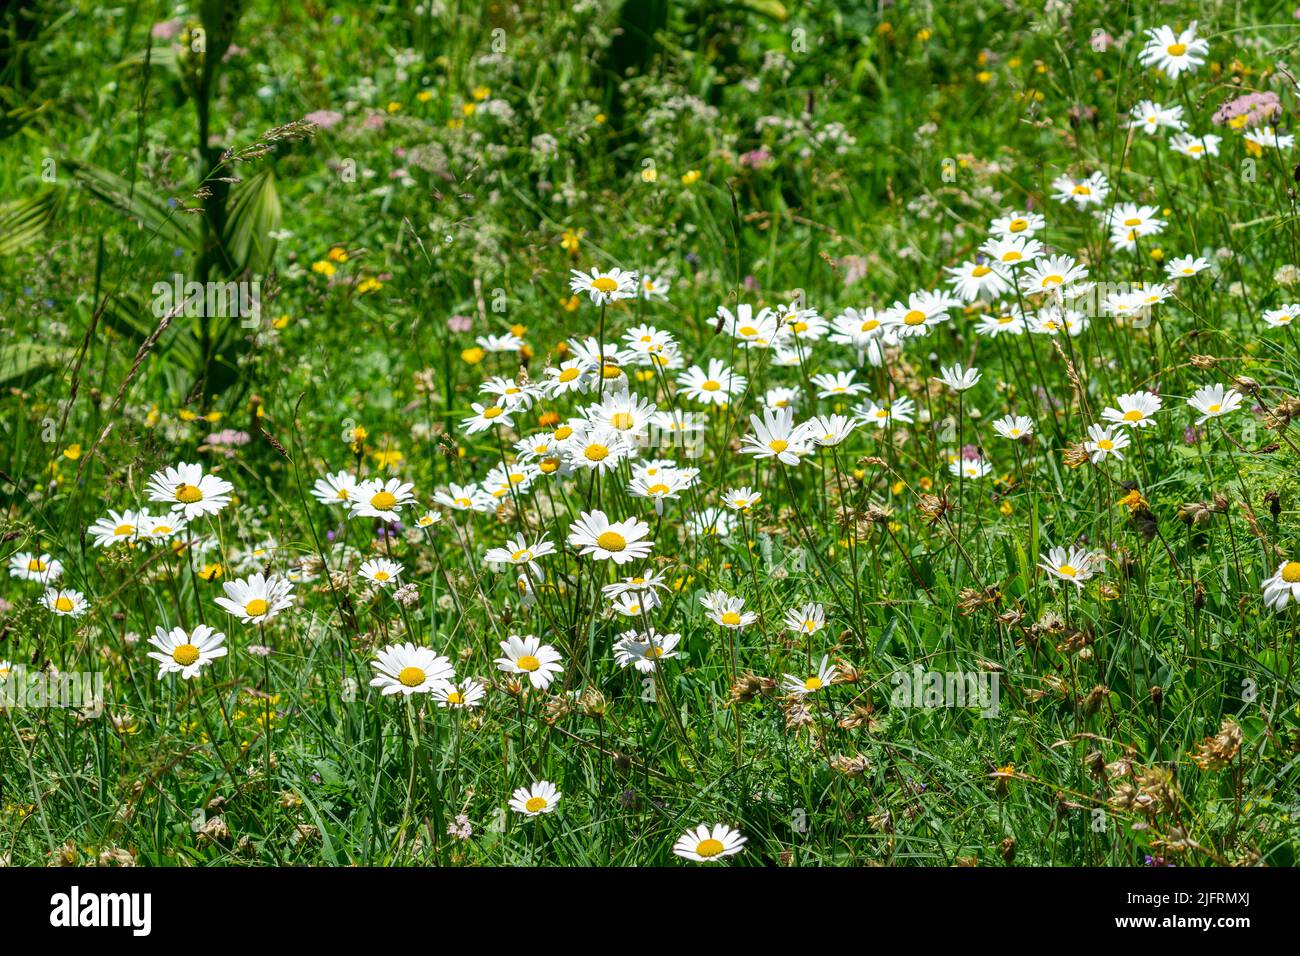 alpine flowered meadow with different flowers, blue bell flower, daisies, arnica, yellow and pink clover, red alpine roses. Flower in white and violet Stock Photo